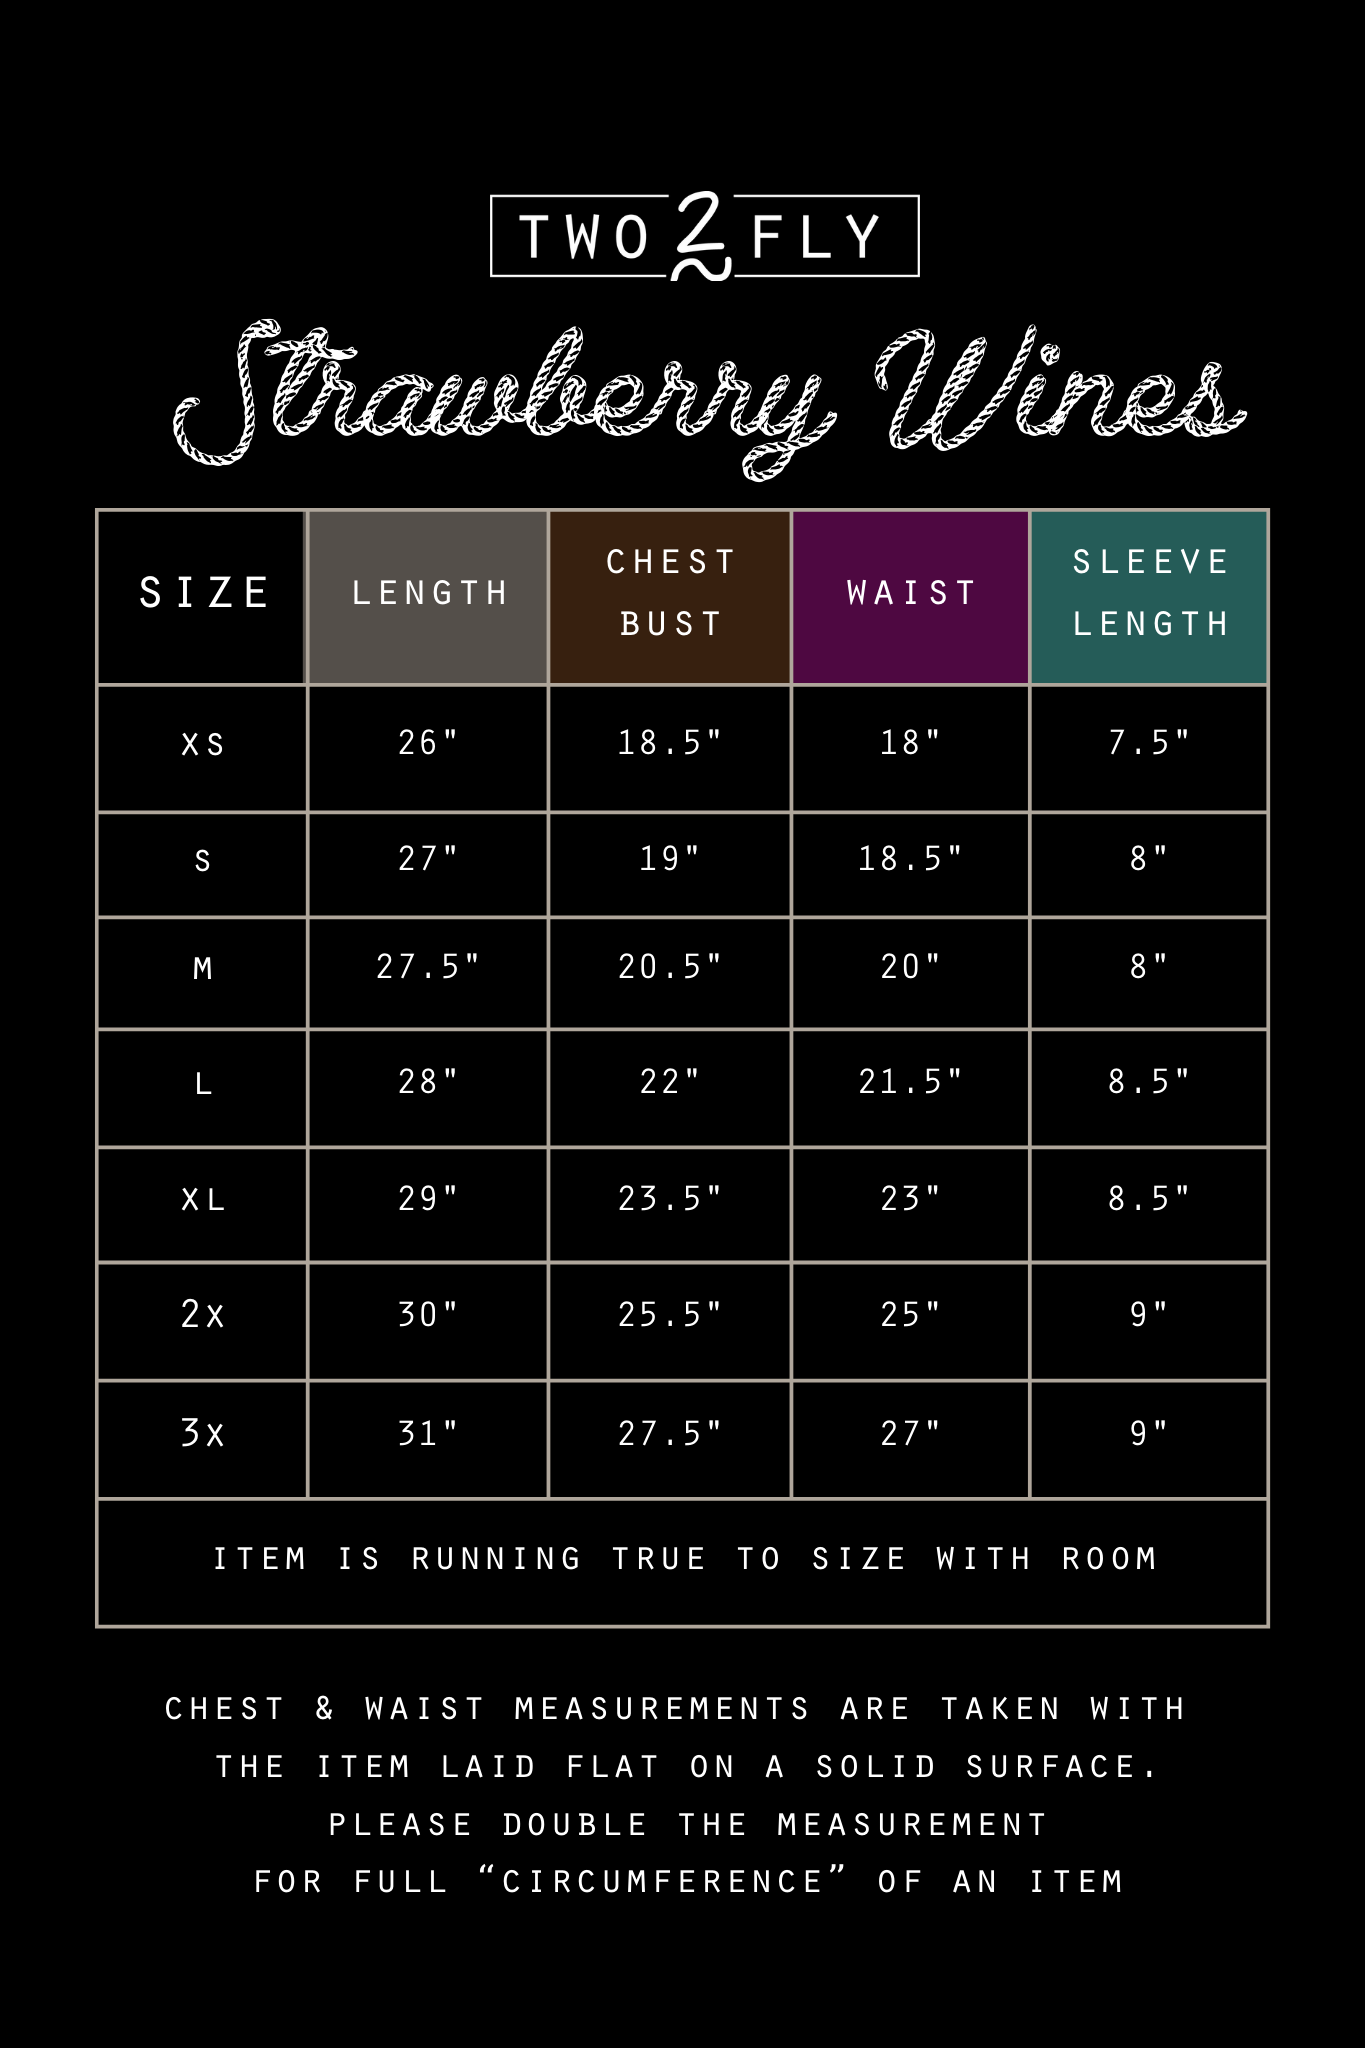 STRAWBERRY WINES [ONLY S AND M LEFT]